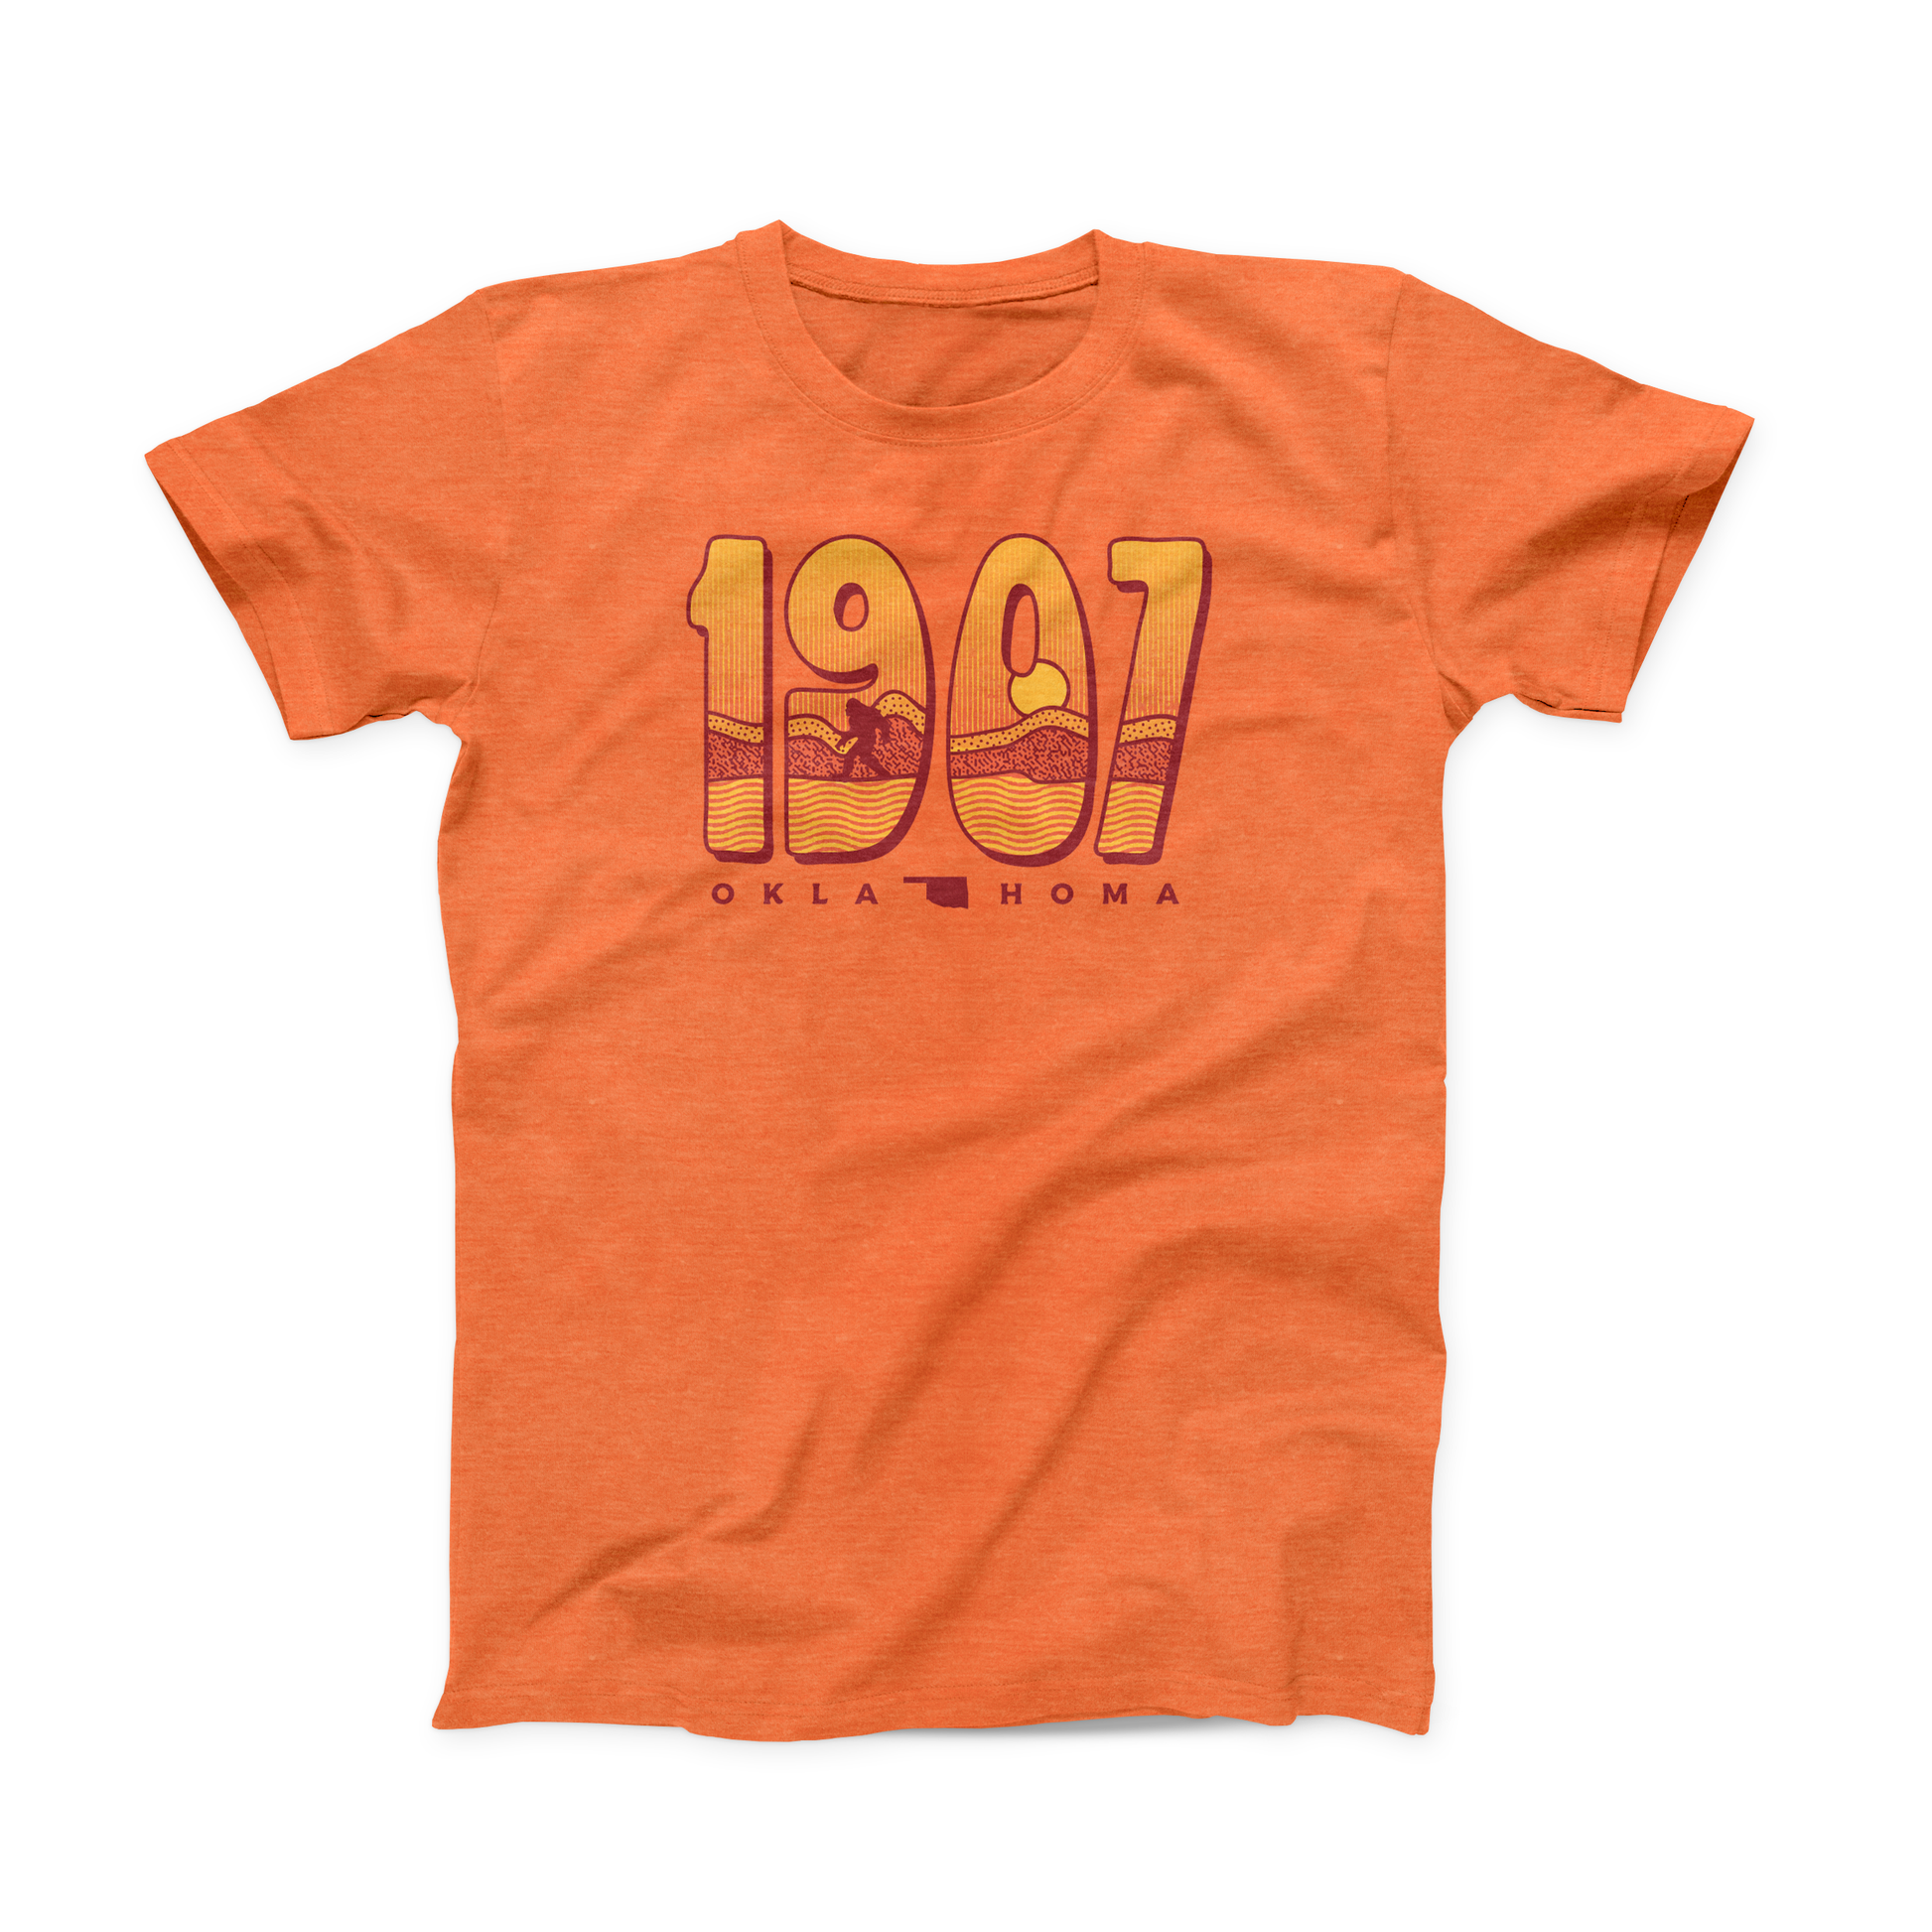 Heather Orange Oklahoma t-shirt. "1907" is the main design, with a sunset and a Sasquatch within the year. "OKLA" (state symbol) "HOMA" in small darker font below the year. 